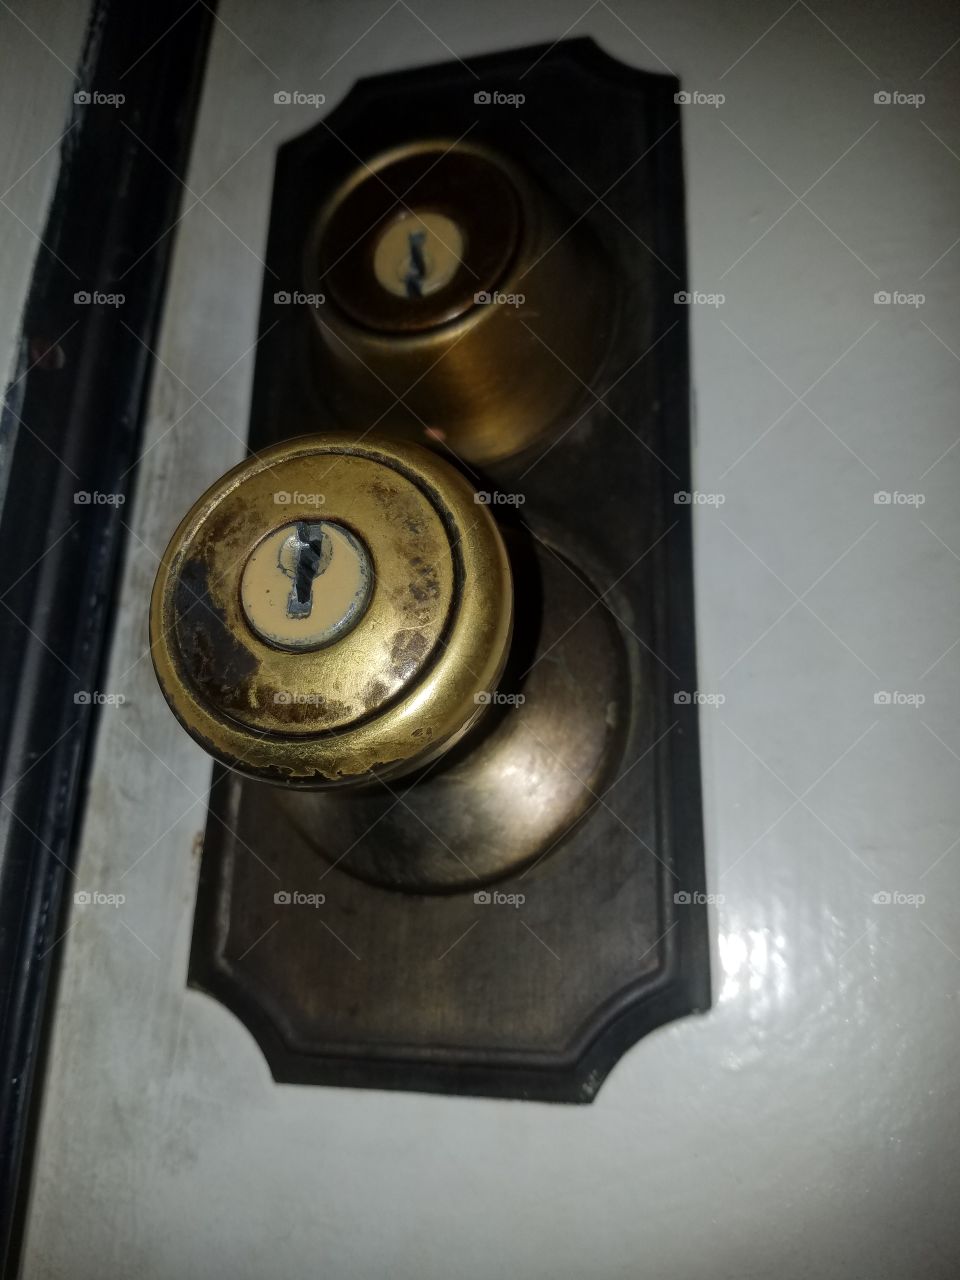 may be an old doorknob to most yet it unlocks comfort to my life